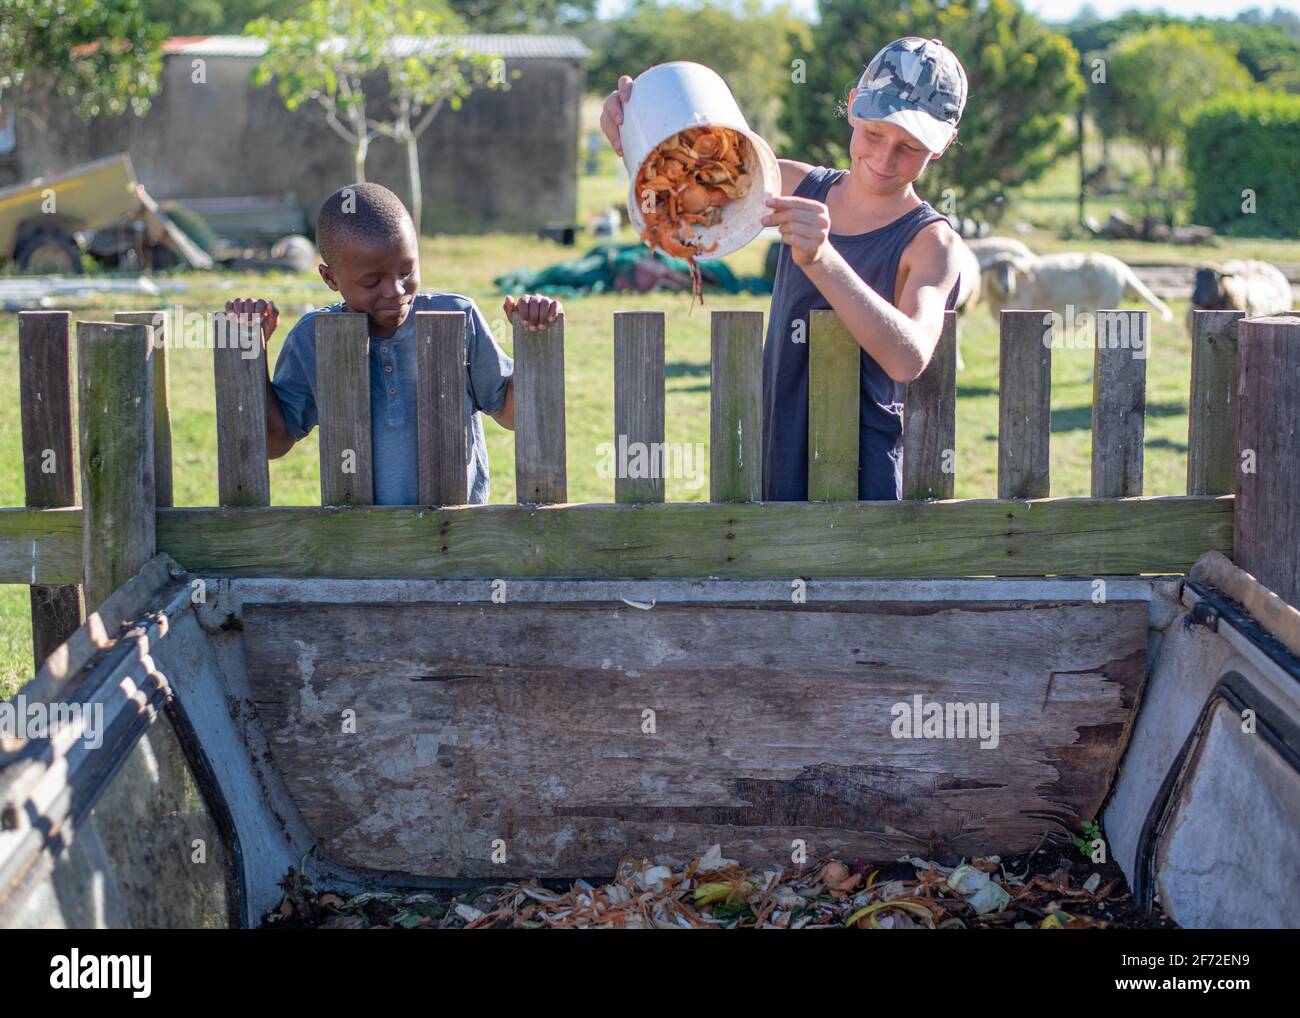 Primary age children emptying food scraps into a compost bin Stock Photo